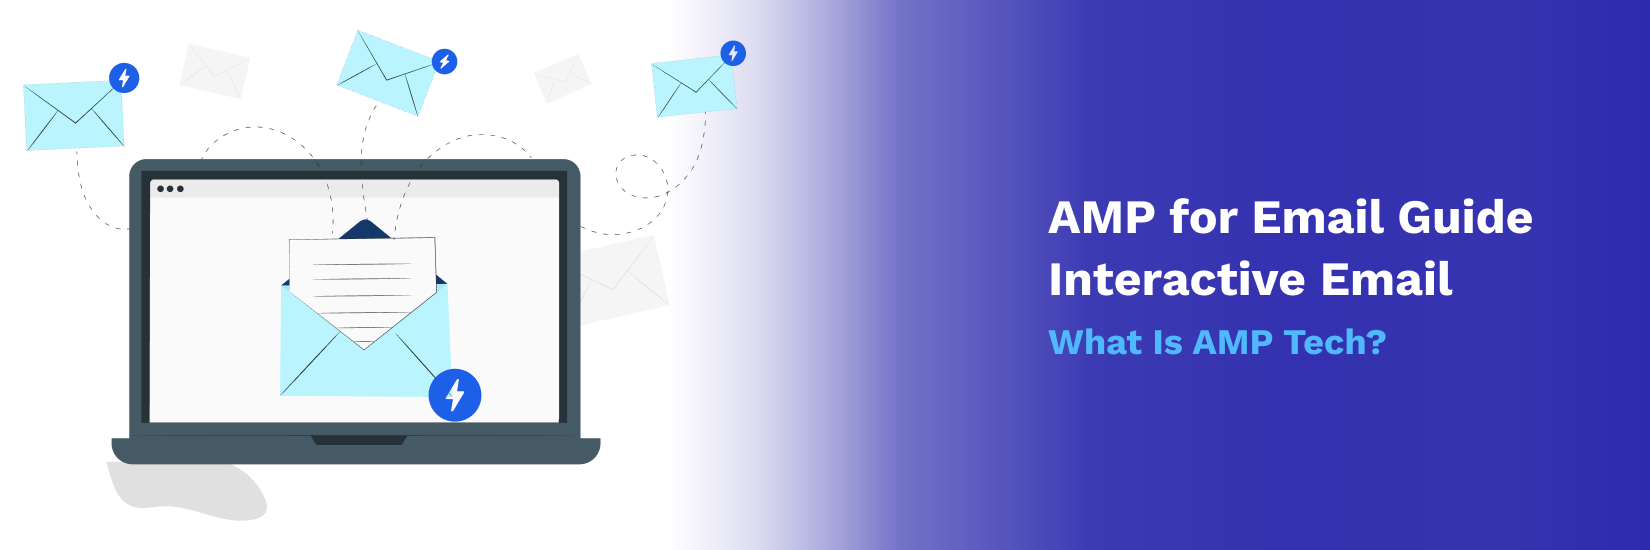 AMP for Email Guide - Interactive Email - What Is AMP Tech?